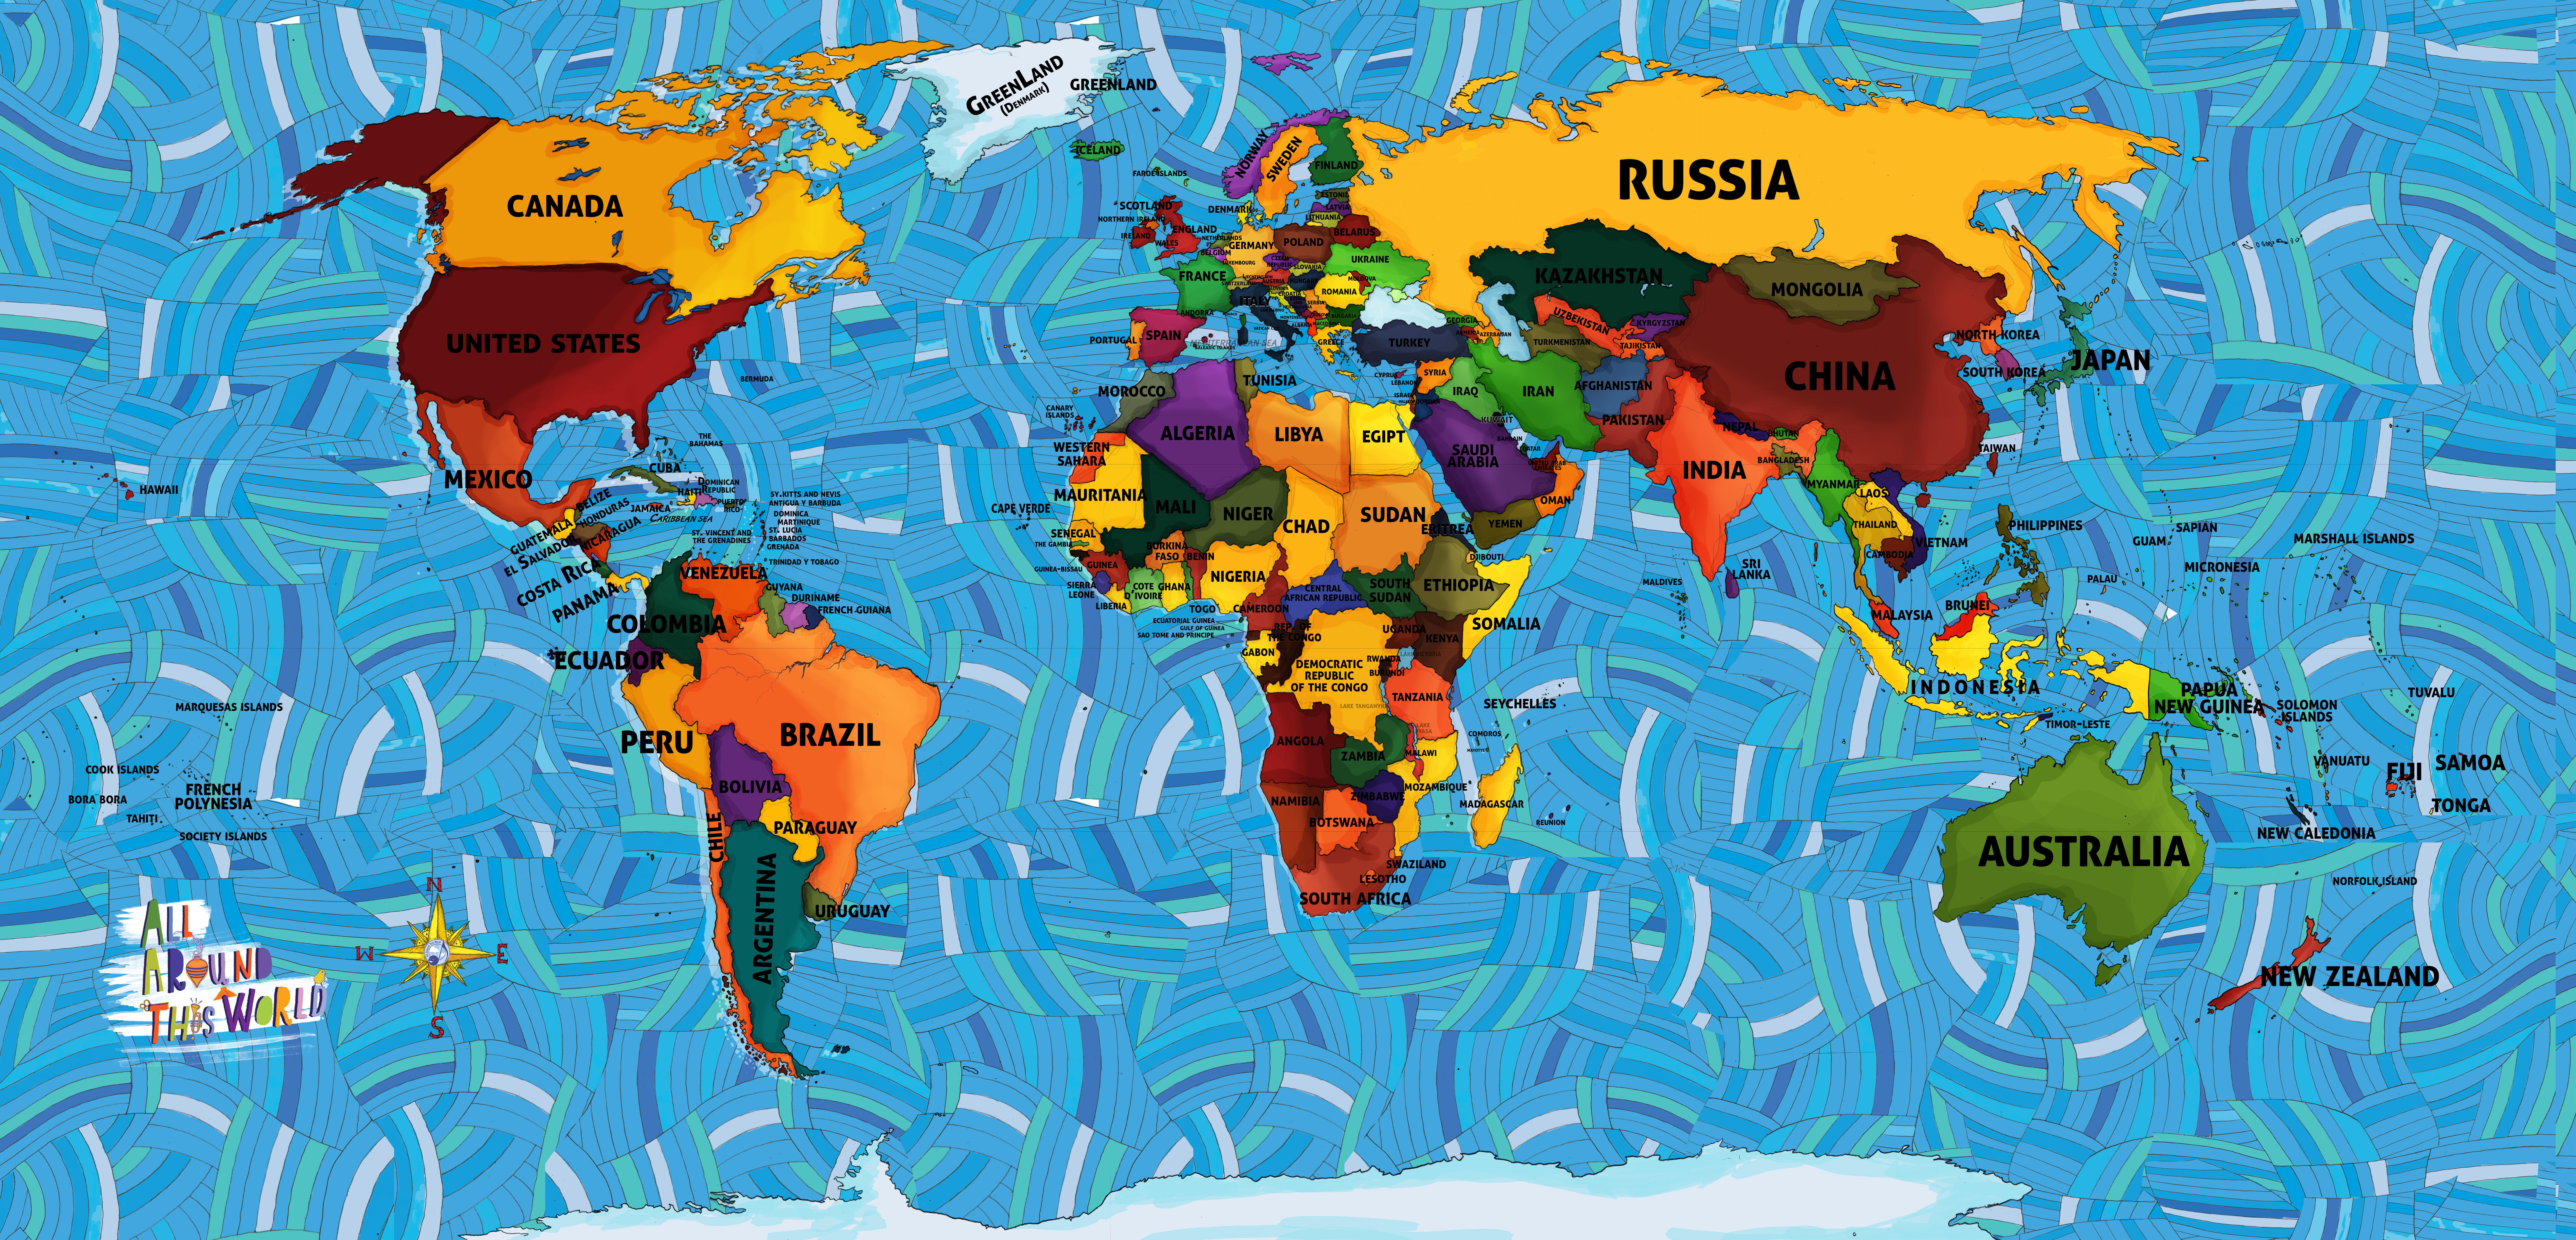 All Around This World Global "Everywhere Map" -- World Music for Kids